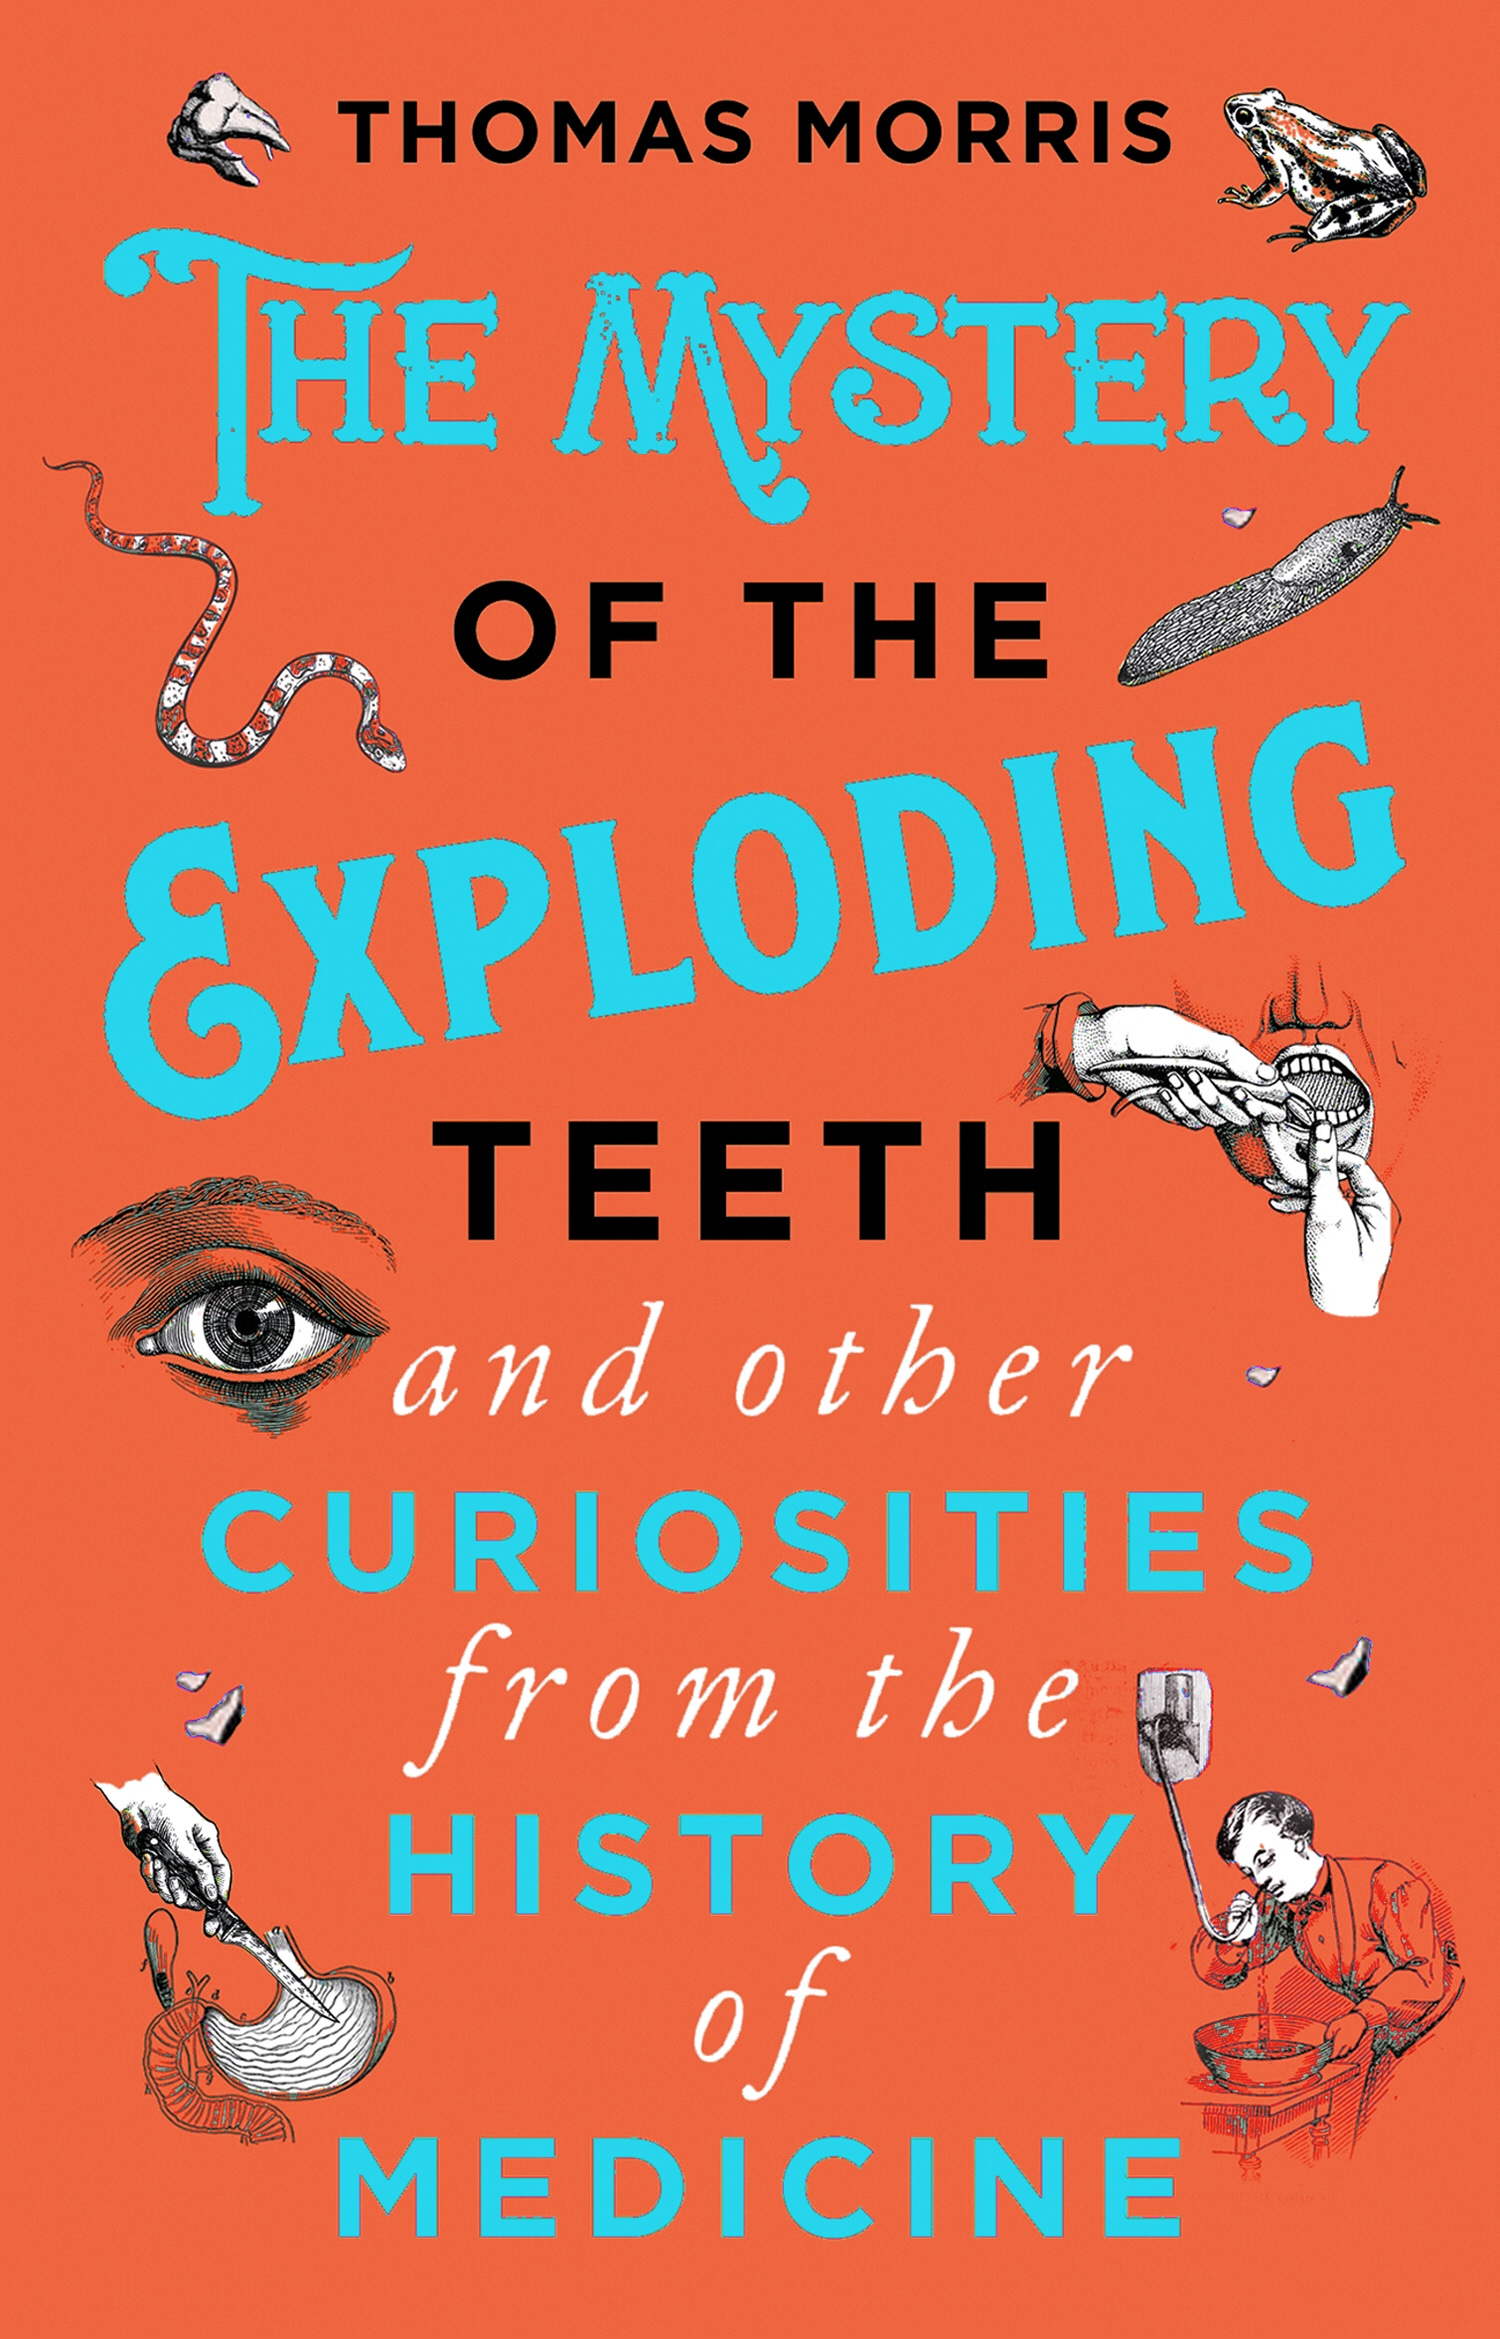 Book “The Mystery of the Exploding Teeth and Other Curiosities from the History of Medicine” by Thomas Morris — October 17, 2019